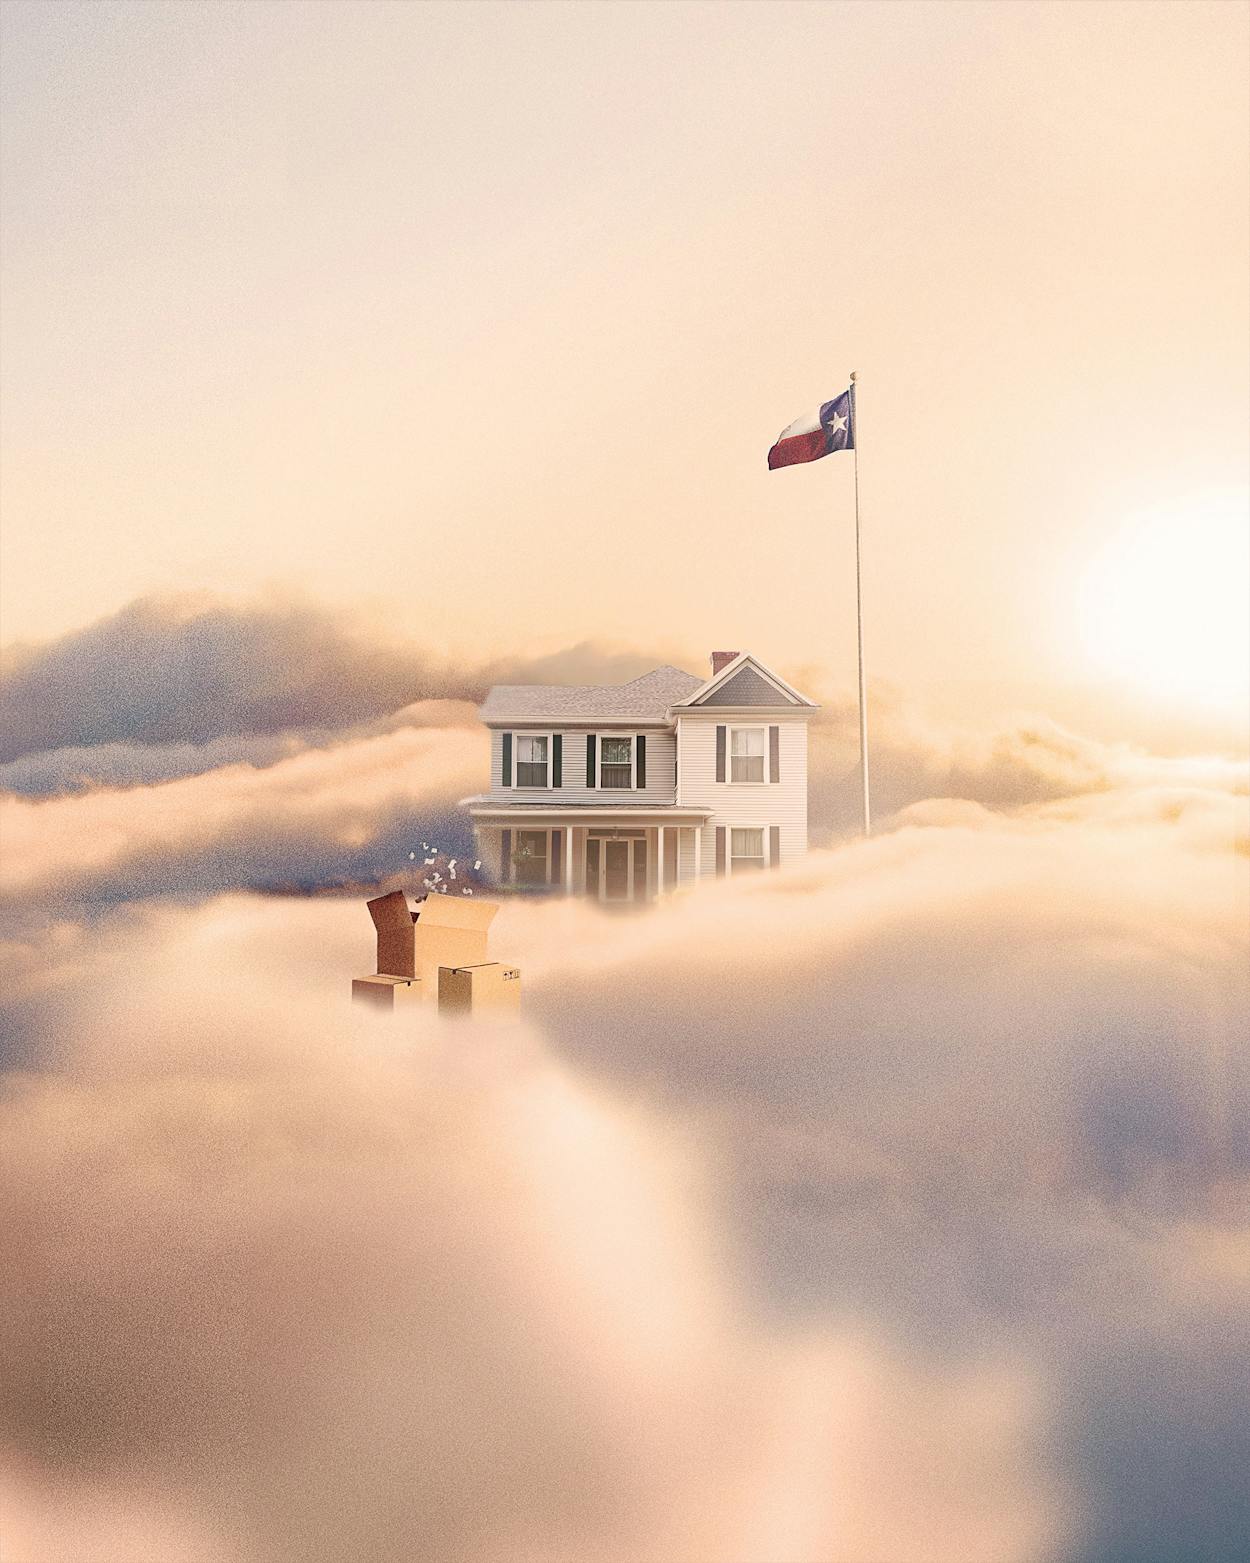 Newest-Texans-house-in-the-clouds-hero-horiz